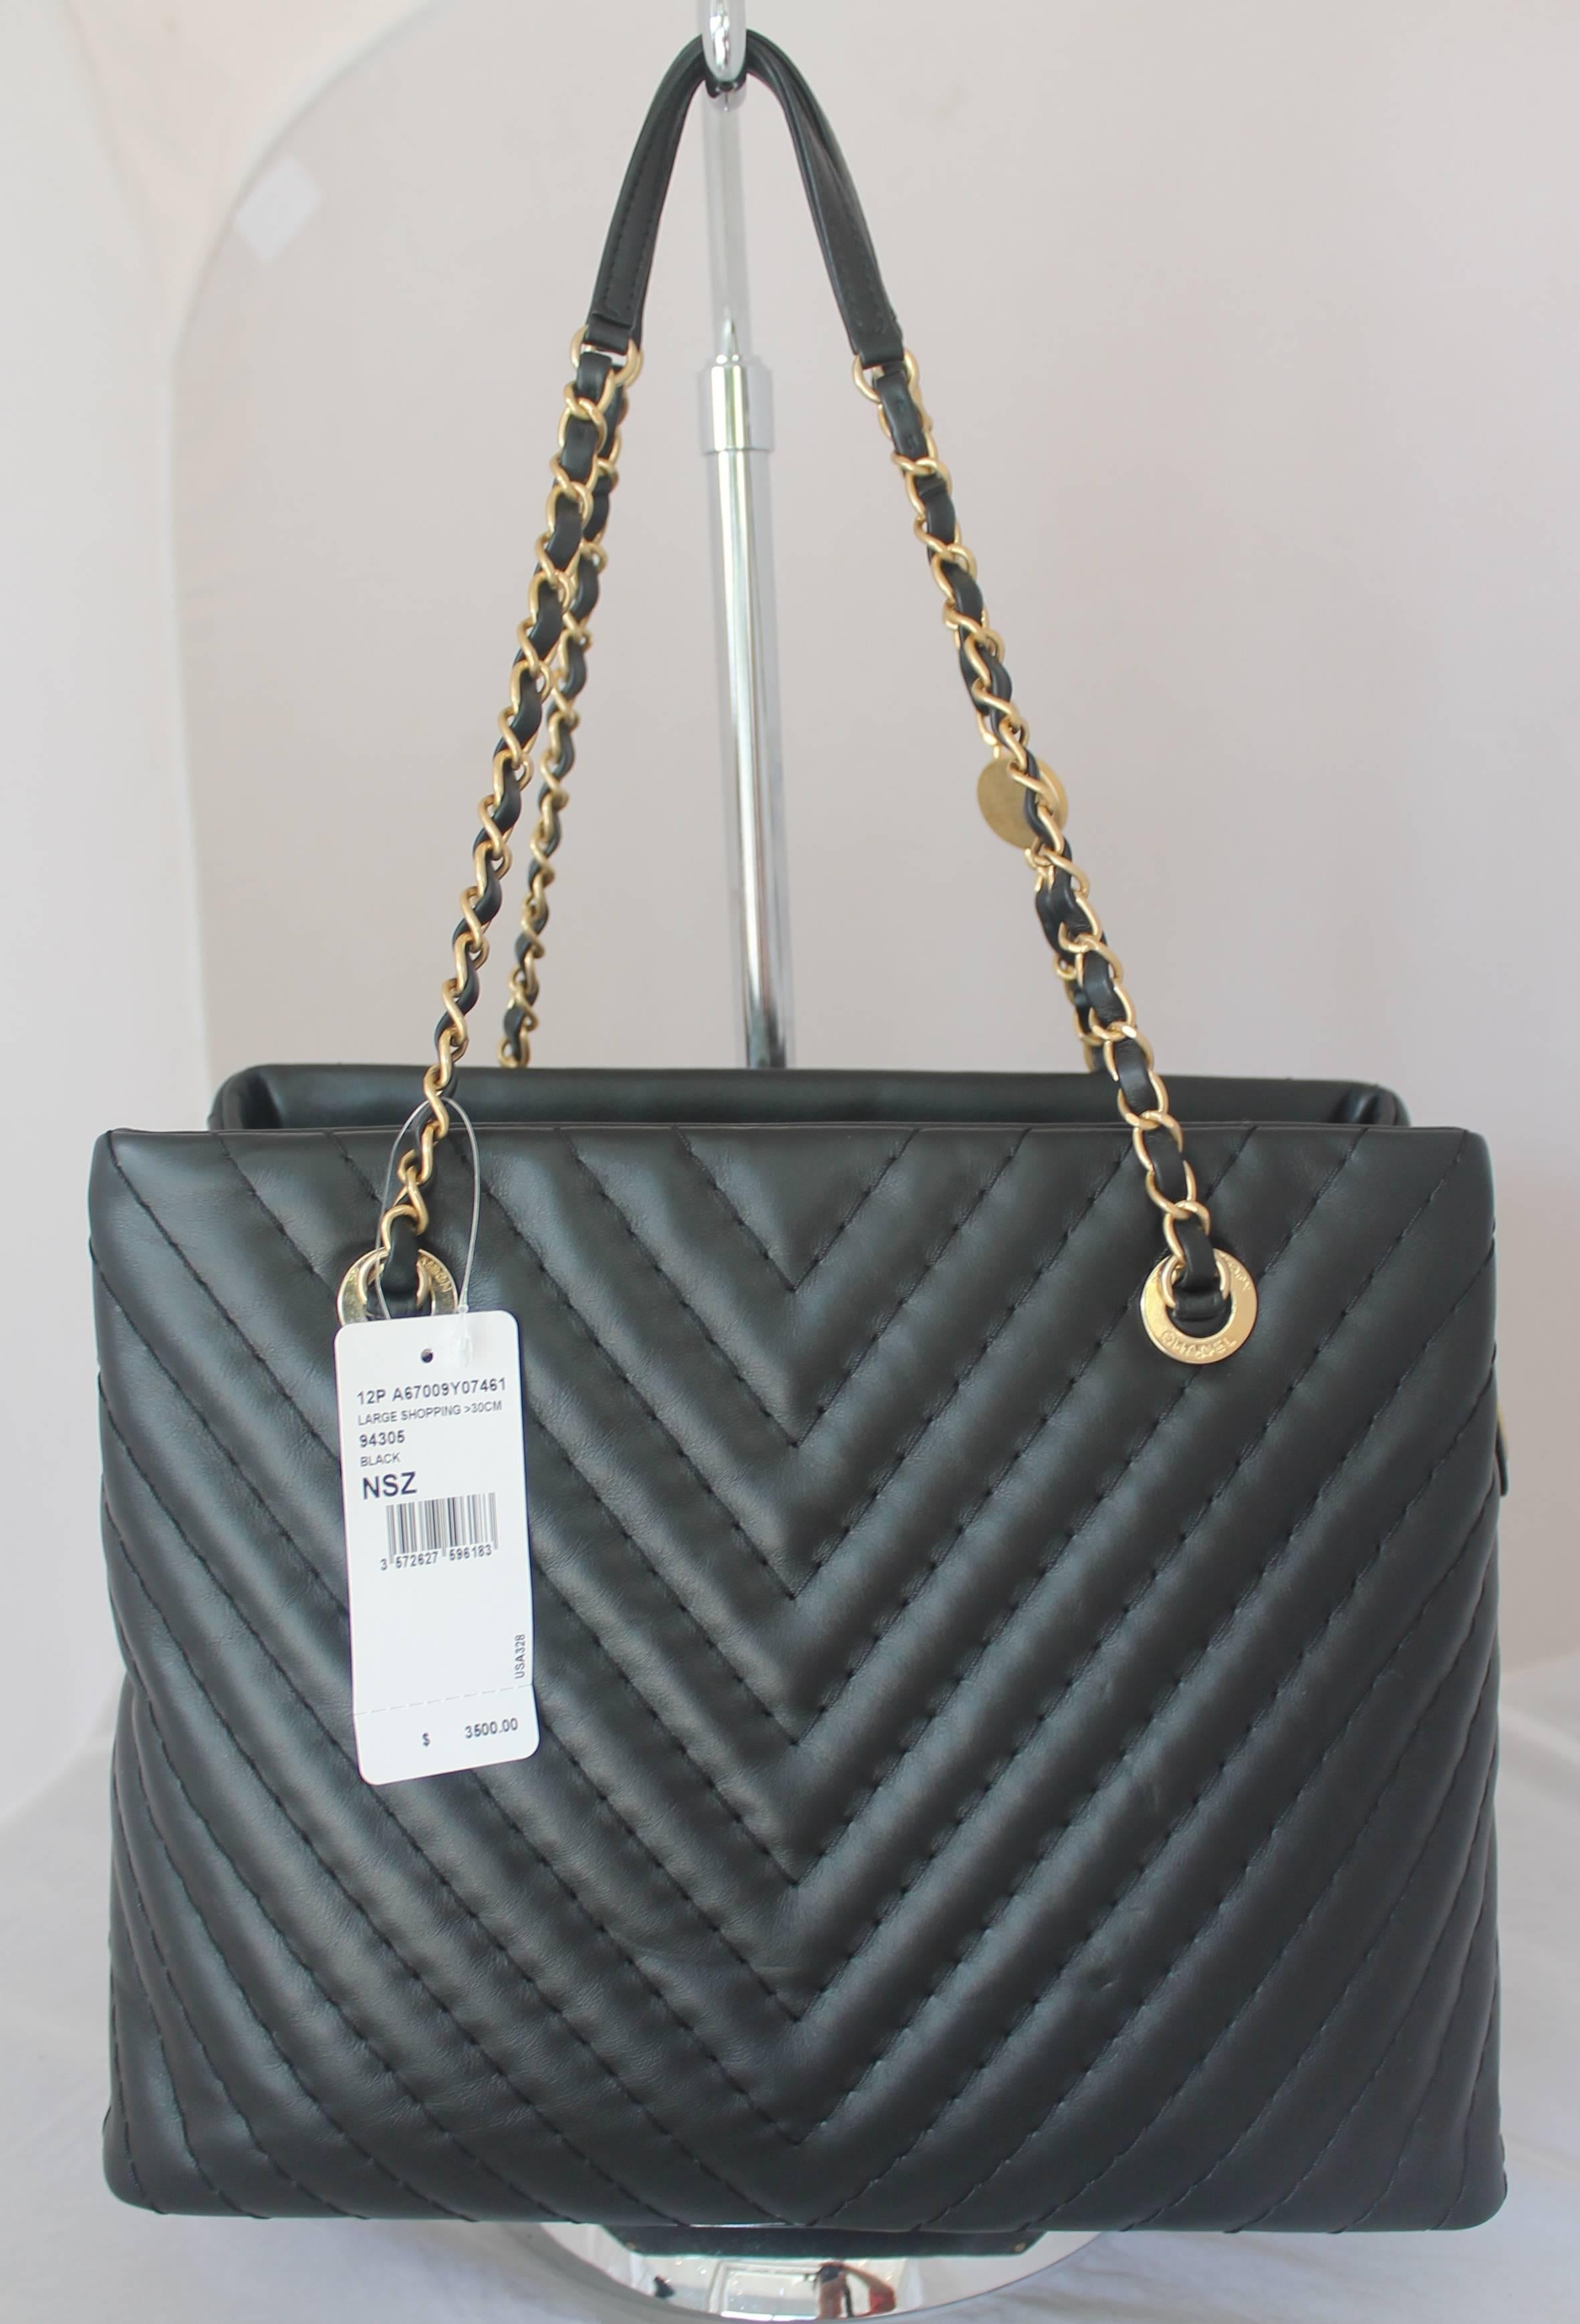 Chanel Black Leather Chevron Shopper Tote - circa 2013-2014. This bag is brand new with tags still attached and has never been worn. It has a matte gold hardware and the inside has 3 compartments with the center one having a